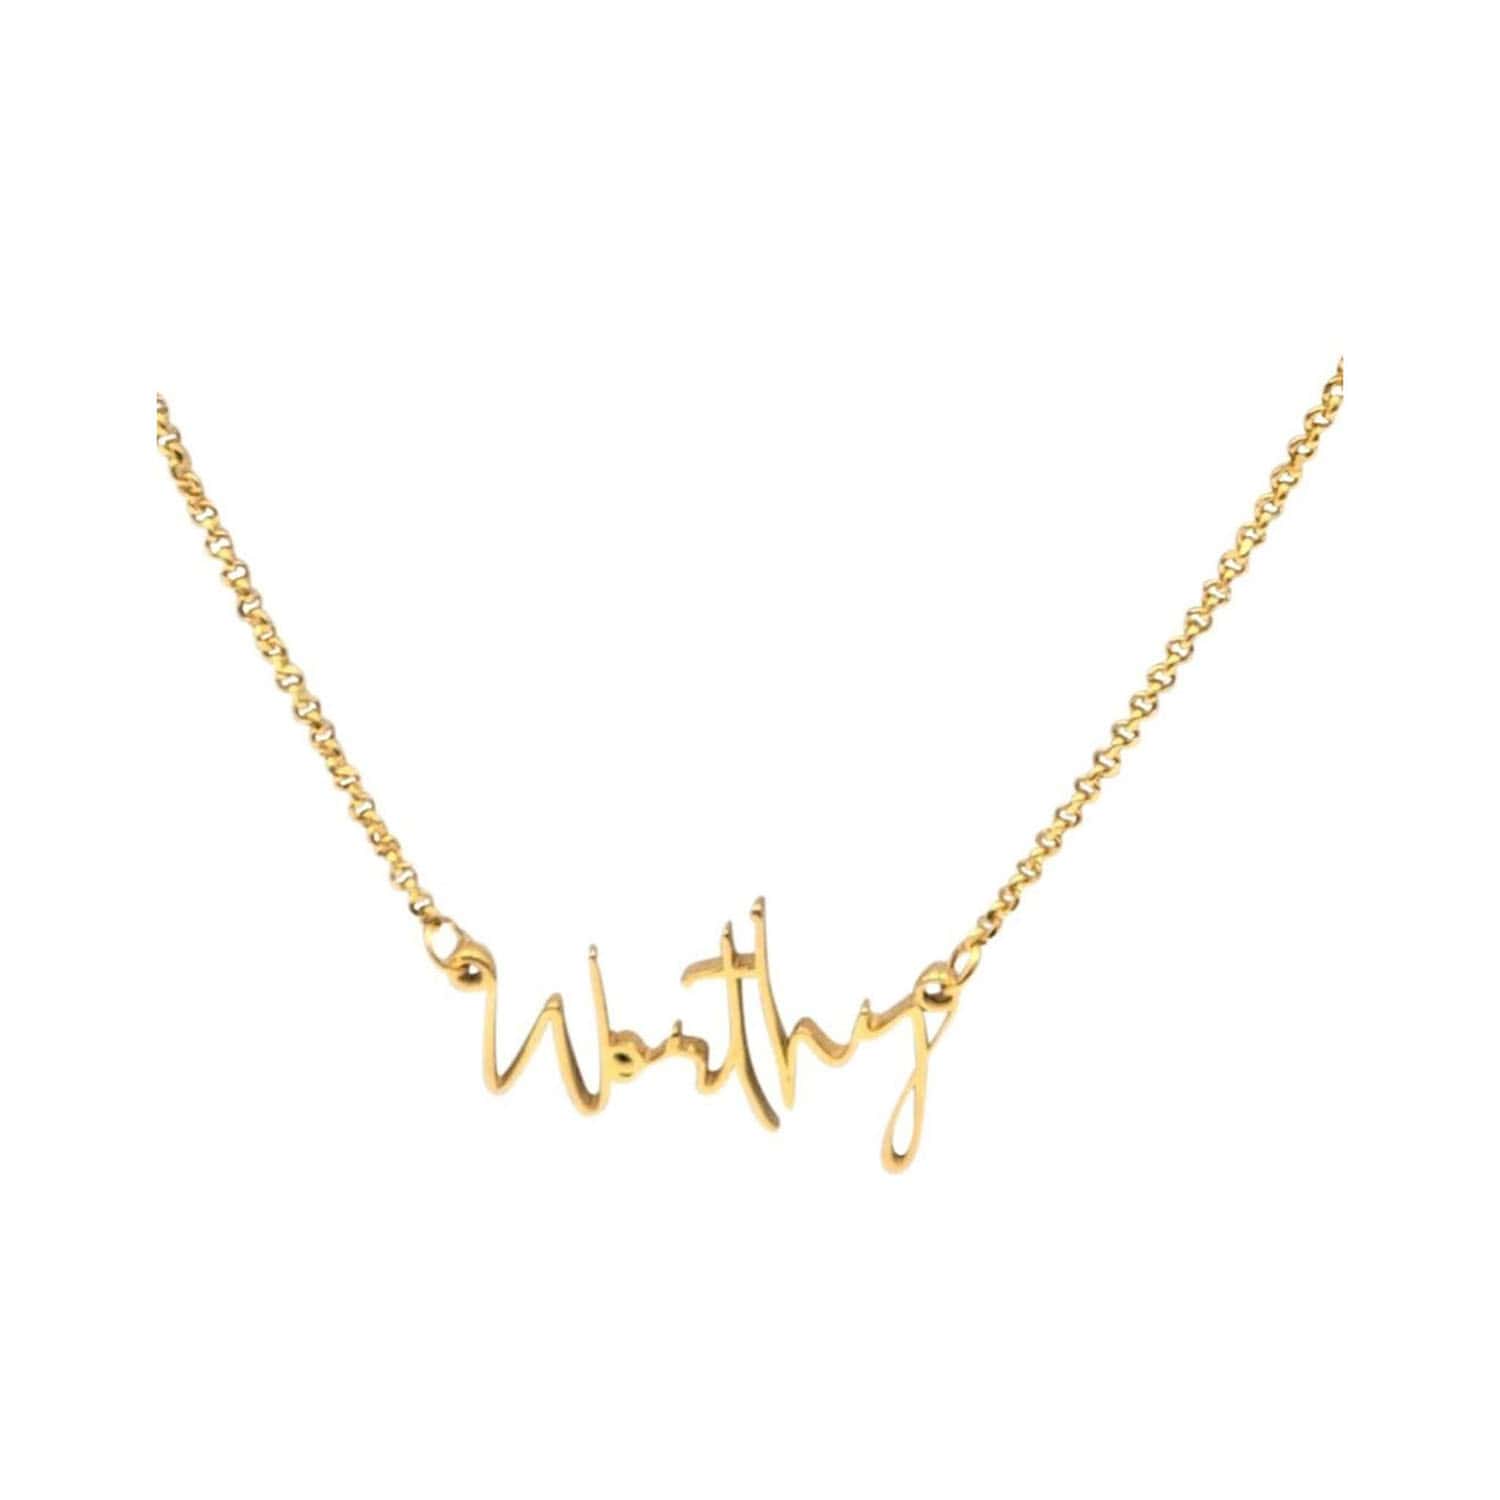 Worthy Gold Affirmation Necklace